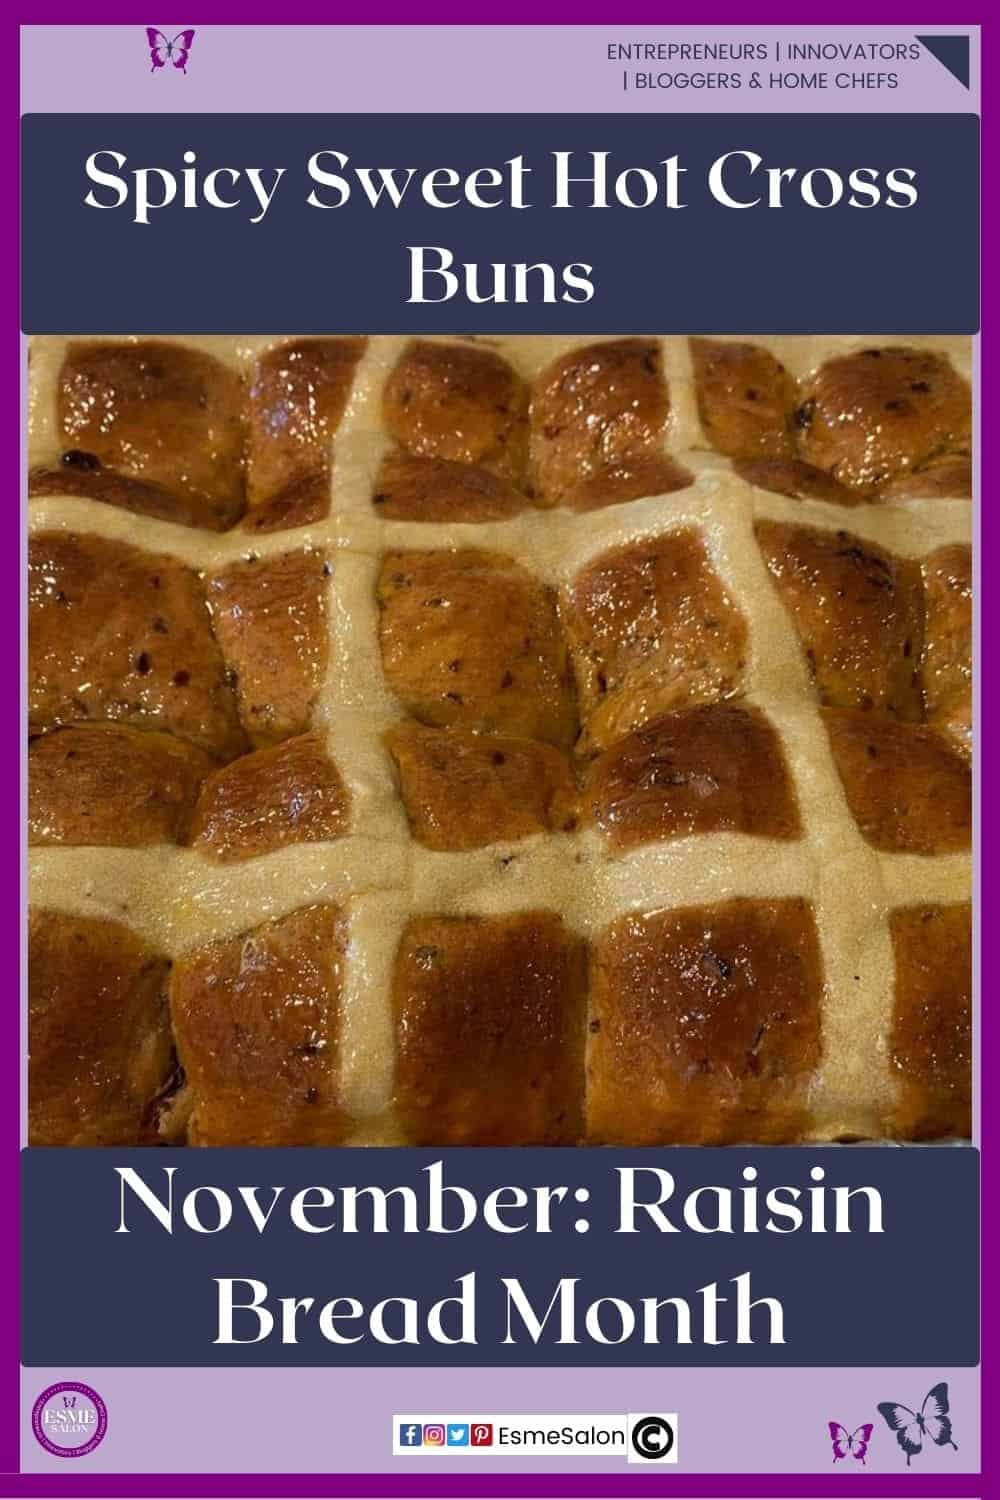 an image of a tinfoil tray filled with Spicy Sweet Hot Cross Buns